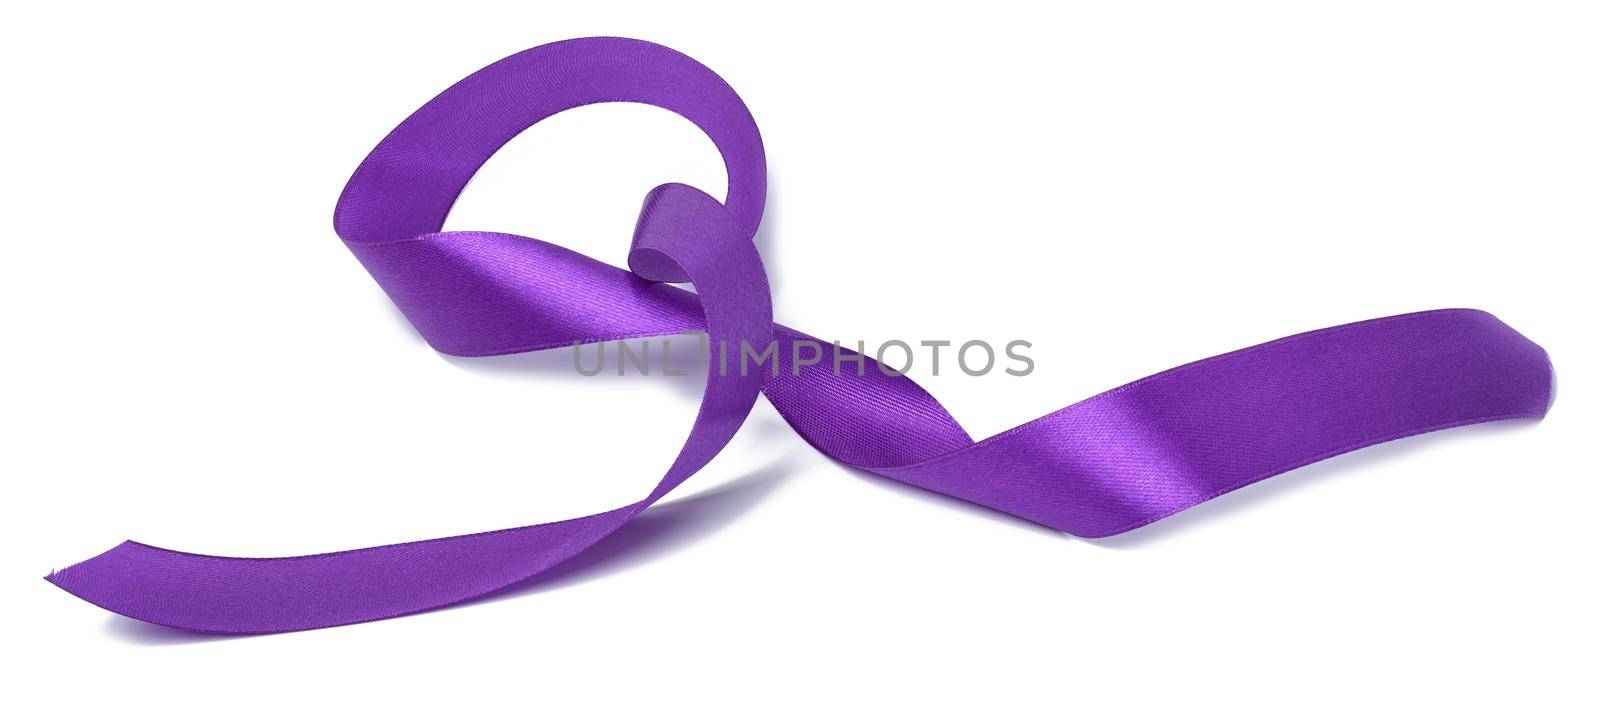 Rolled up silk purple ribbon isolated on white background by ndanko